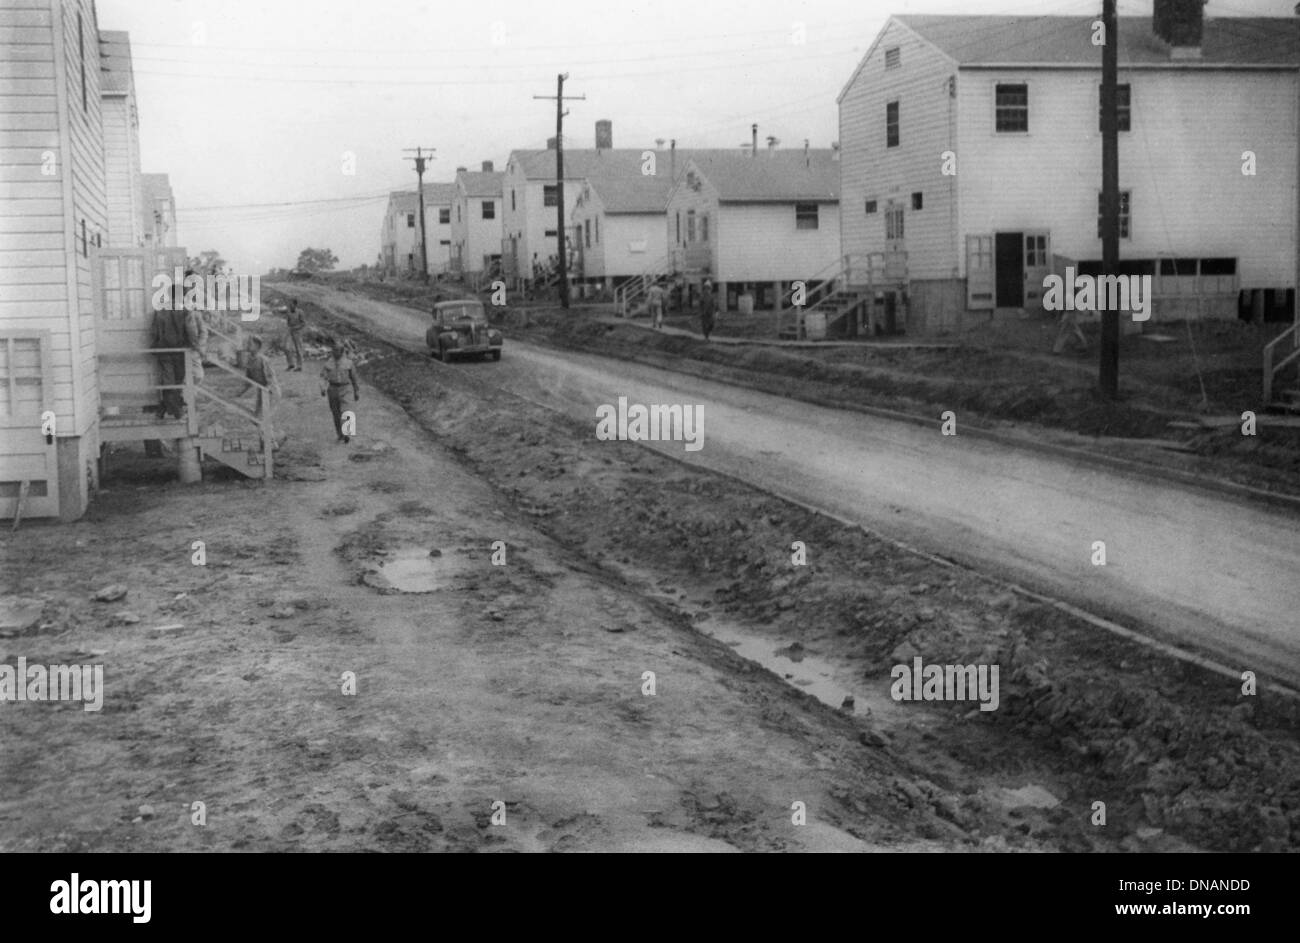 Military Buildings Along Muddy Road, WWII, 2nd Battalion, 389th Infantry, US Army Military Base Indiana, USA, 1942 Stock Photo